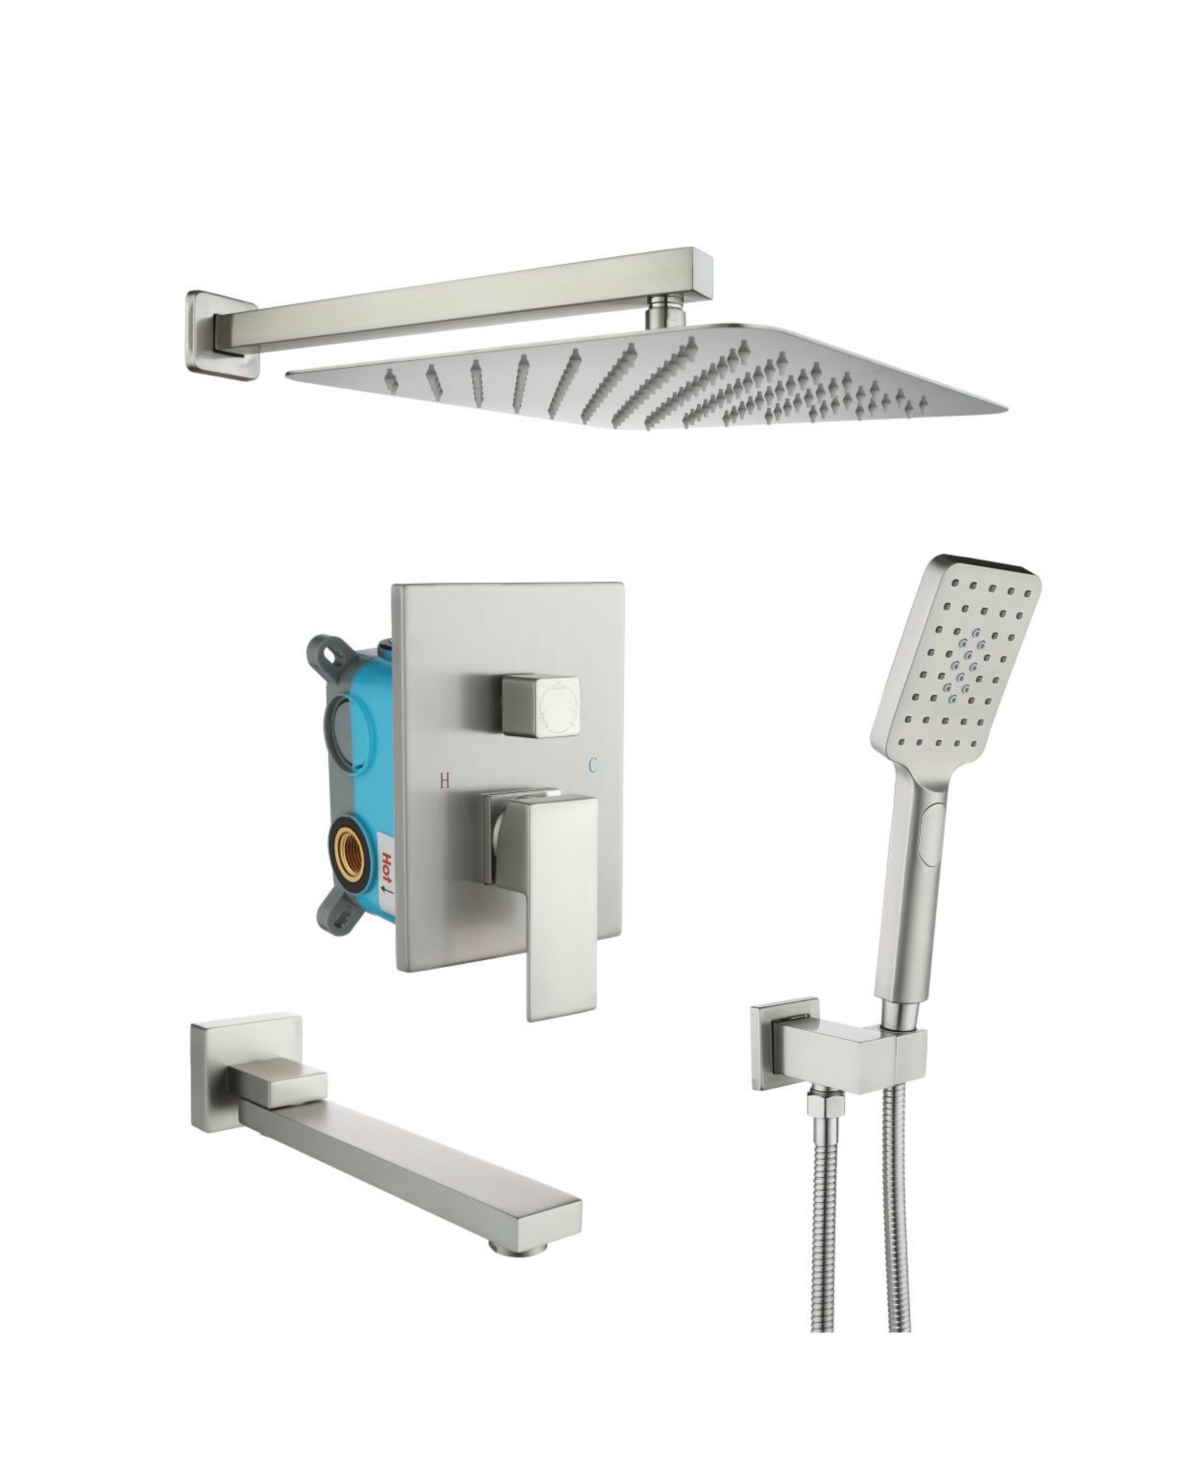 Anti-Scald Shower Faucet Set with Wall Mounted Rain Shower - Silver